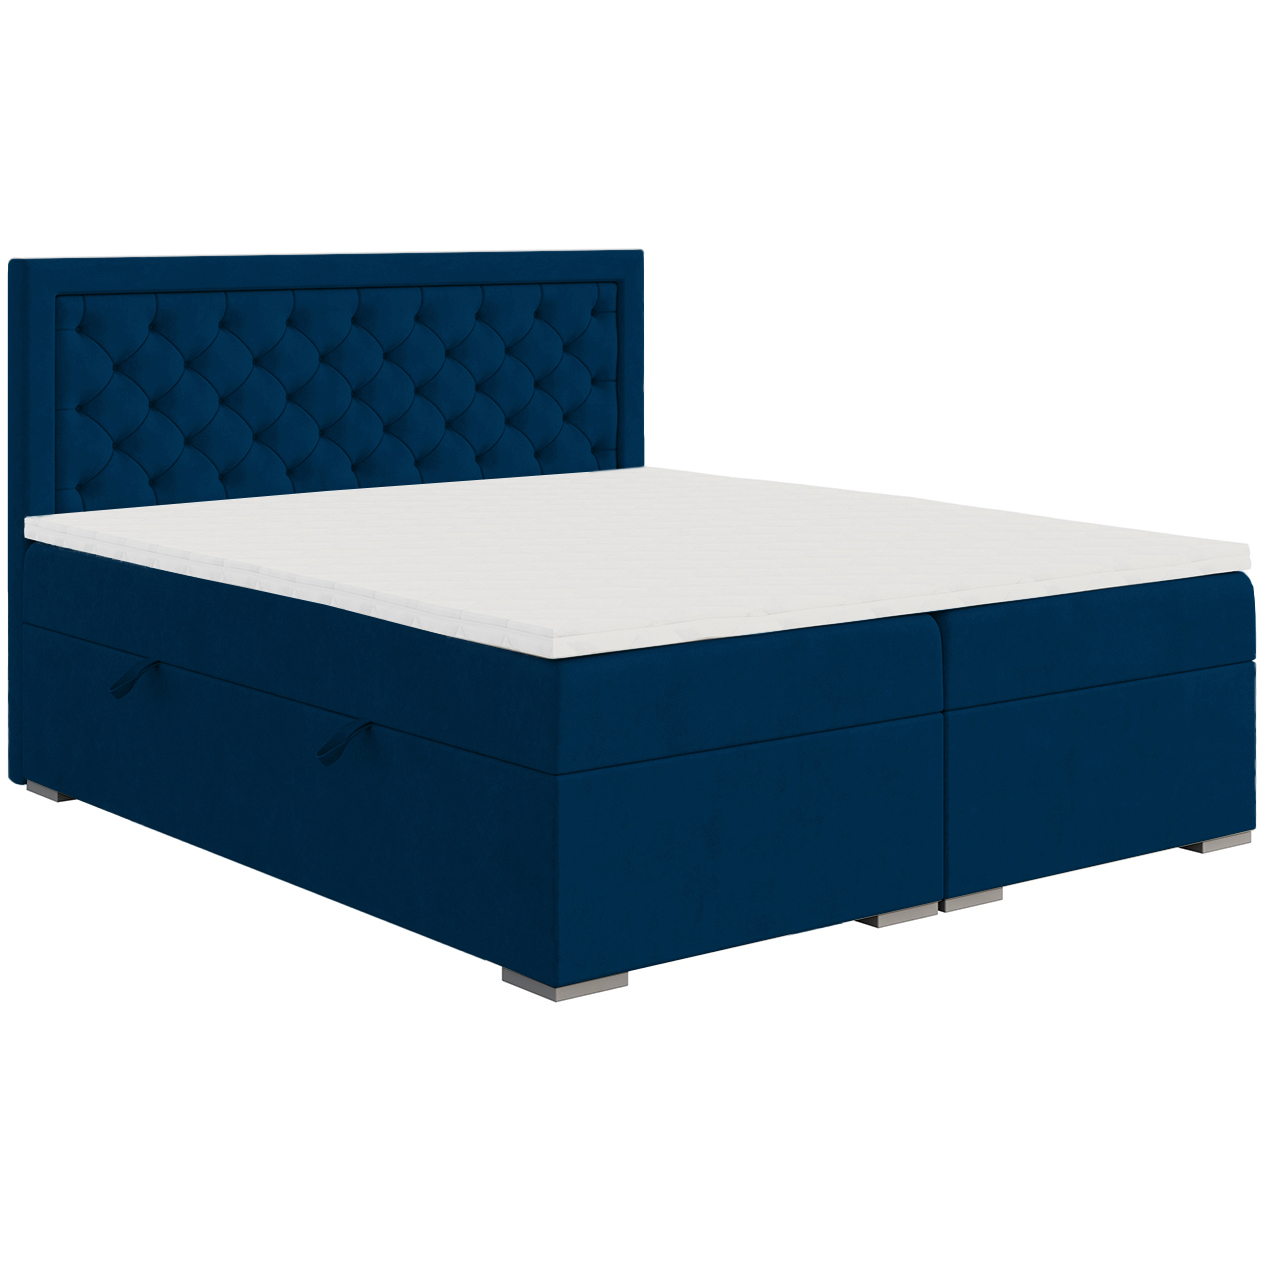 Upholstered bed BLUM 140x200 riviera 81